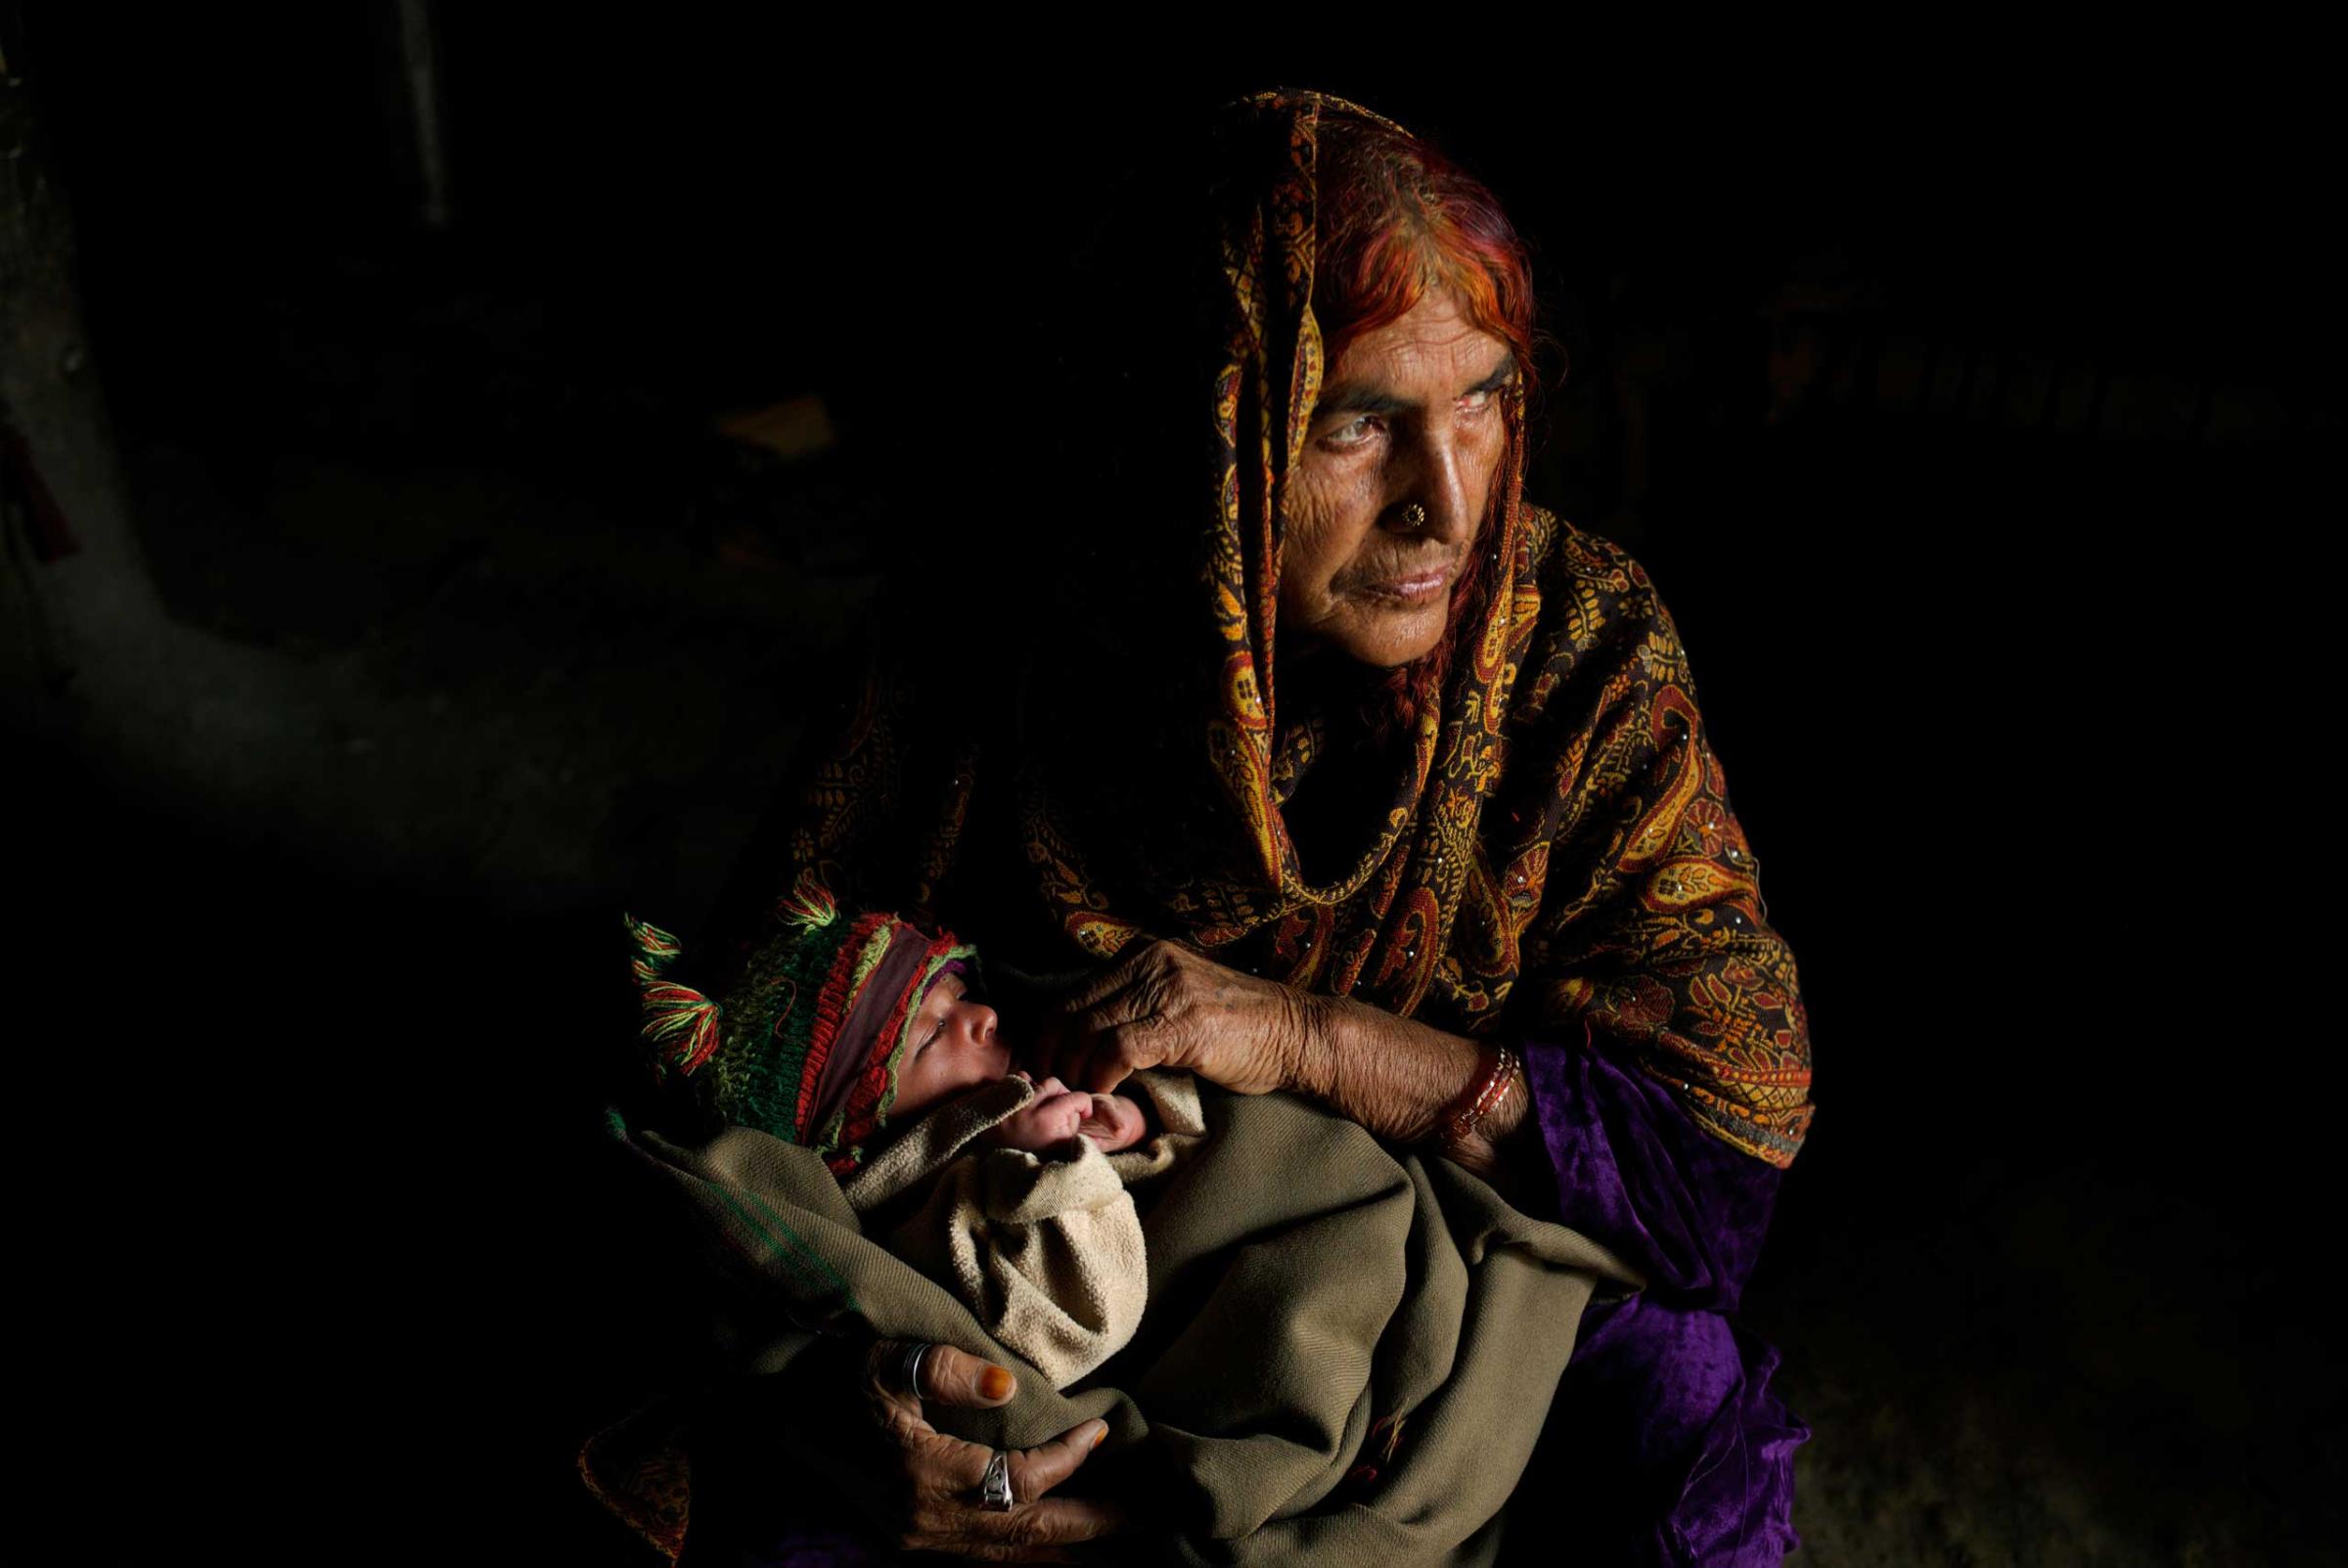 ISLAMABAD, PAKISTAN; FEBRUARY 2104 Holding her twenty-five day old grandson Ziaullah, elderly Bacha Hilal squats down in the mud hut that has become home since escaping conflict in Bajaur. “The first time the Taliban came our life became limited only to our house. They didn’t let us go to our fields or collect wood from the mountains and we weren’t even allowed to go to the river for water. They demanded that no child should go to school and anyone working for the government should abandon their jobs. They even banned dogs, cockerels and donkeys and instructed the men to start cultivating poppy. After Eid in 2008 the army came. They started shelling and their tanks began to flatten the houses… There was a big ditch in the land by our home and there were times we would spend two or three nights there taking shelter with the children. A lot of people were killed; the Taliban were slaughtering on the ground and the army was bombing from above. One day a mortar landed very close to us; the shrapnel hit my husband in the eye. At 4am the next morning we left. We were all so scared as there were landmines all around. Nobody stayed behind; our whole village fled”. Surrounded by a population from Pakistan’s tribal areas at a sprawling, illegal settlement near Islamabad, the sanctuary that Bacha Hilal found is one she fears will become her grave. “In Islamabad we live in poverty. We can’t even afford the smallest of things and don’t know if we will eat one day or the next. We’ve borrowed all we can against our lands but no longer have any money. We are still IDPs. Because of the fighting, we are in this condition”.